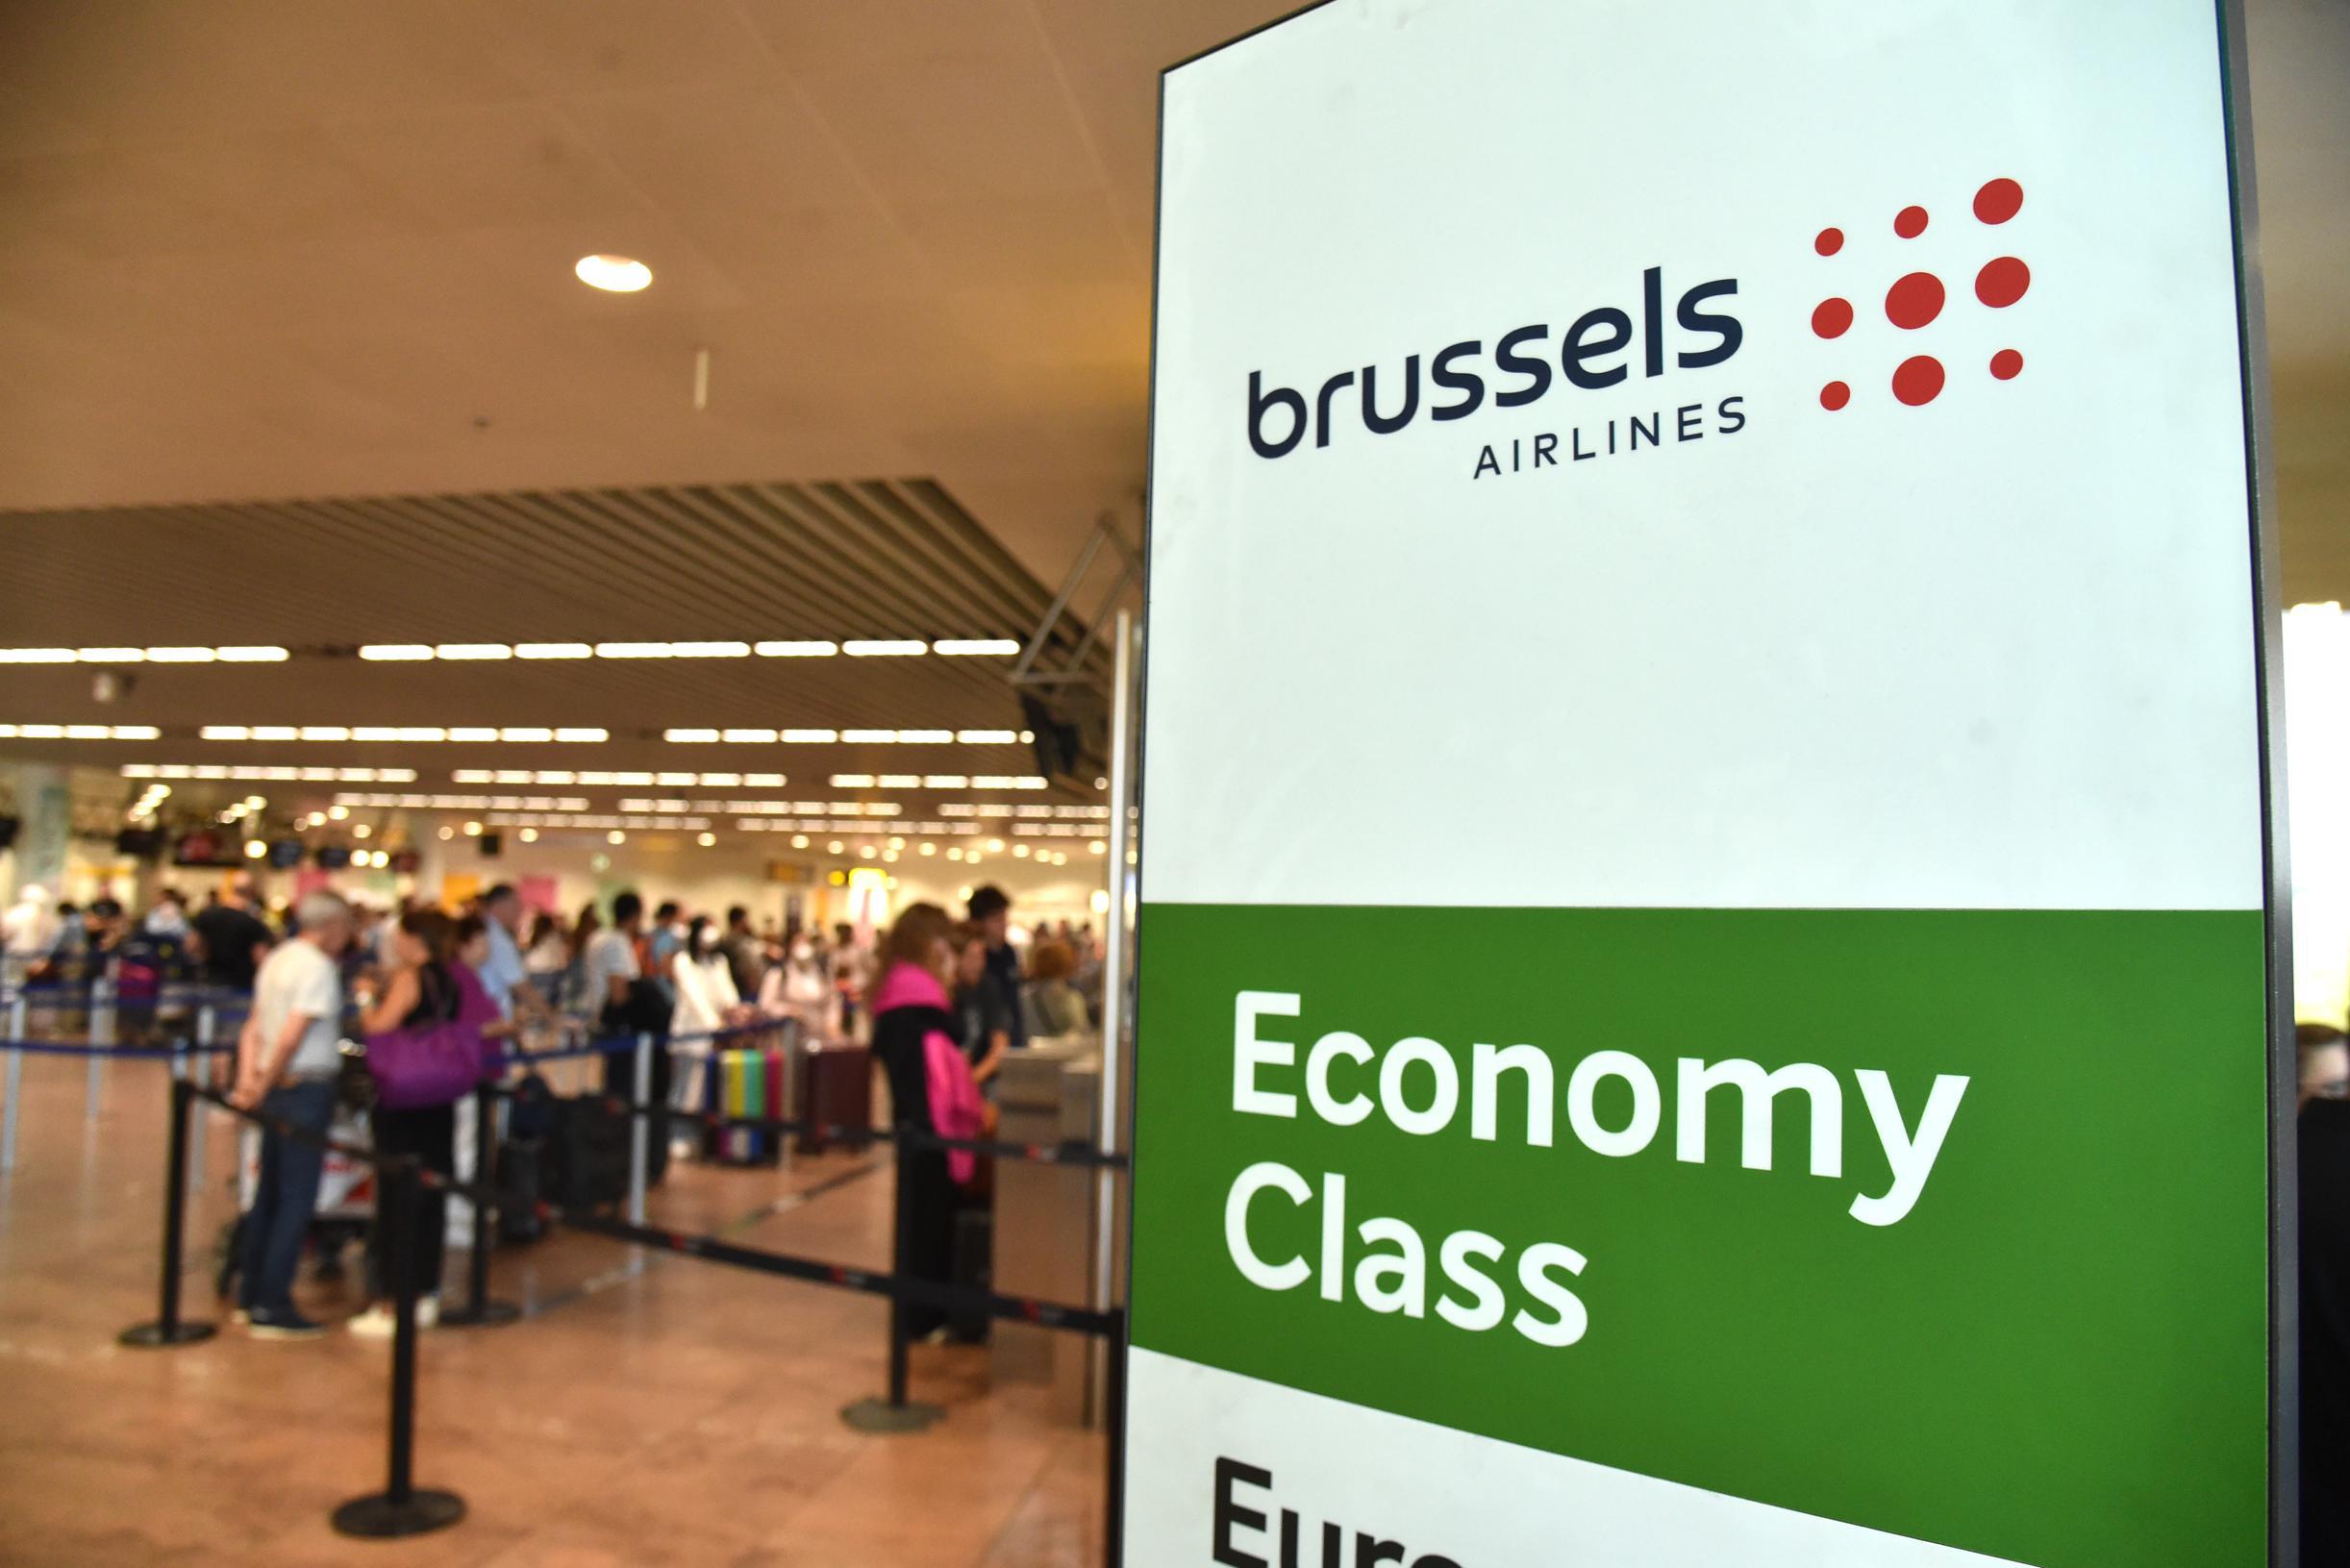 527 extra flights canceled at Brussels Airlines: in total, almost 700 flights have already been canceled this summer